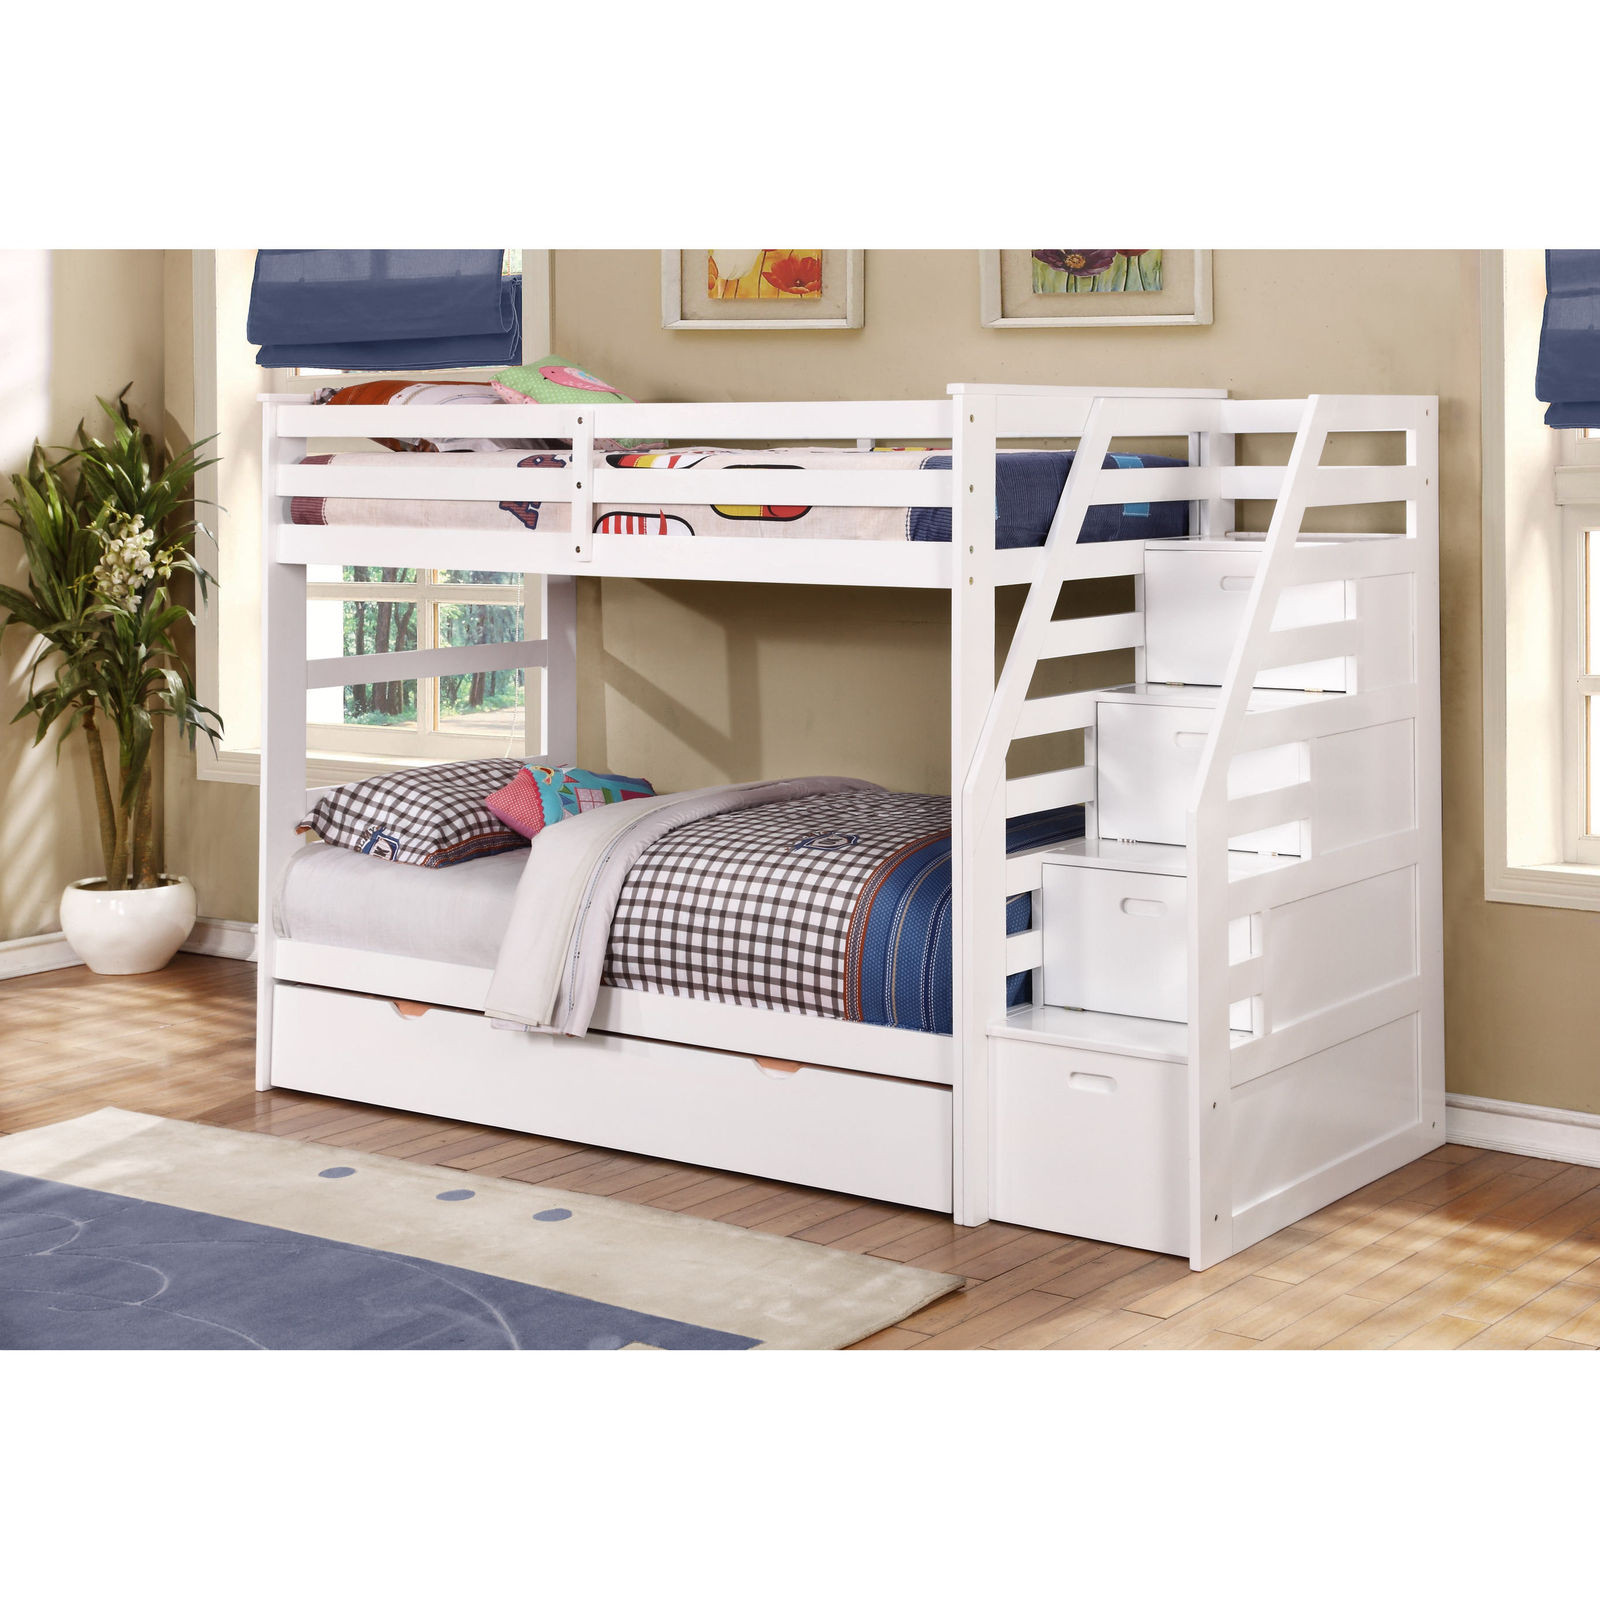 Childrens Bunk Bed With Storage
 Kids Twin Over Twin Triple Bunk Bed with Trundle and